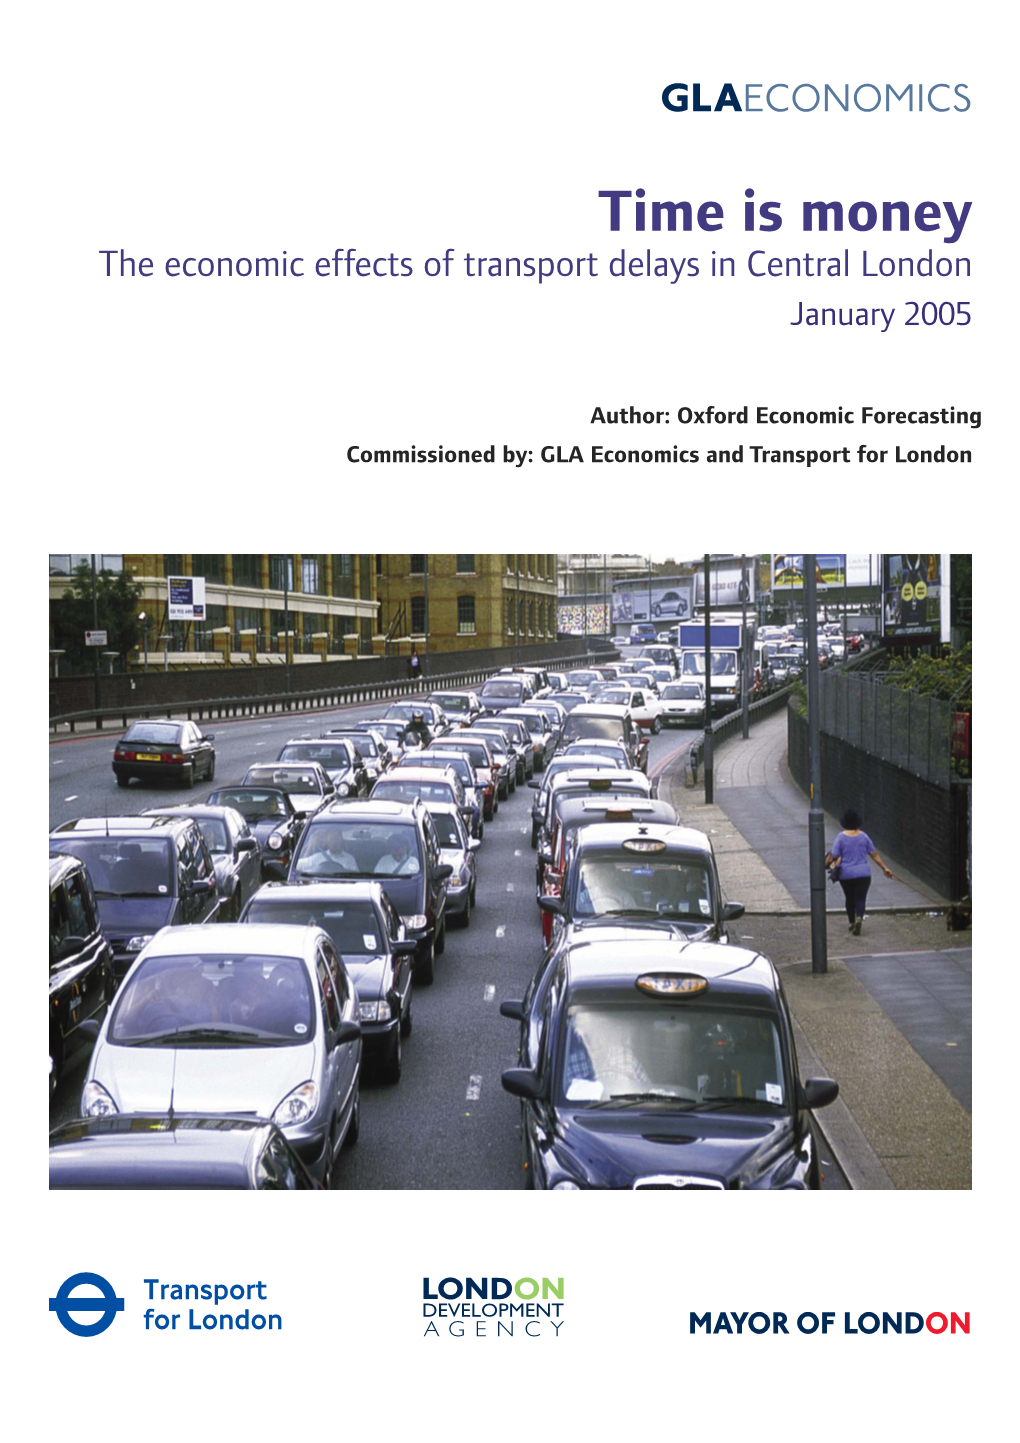 The Economic Effects of Transport Delays in Central London January 2005